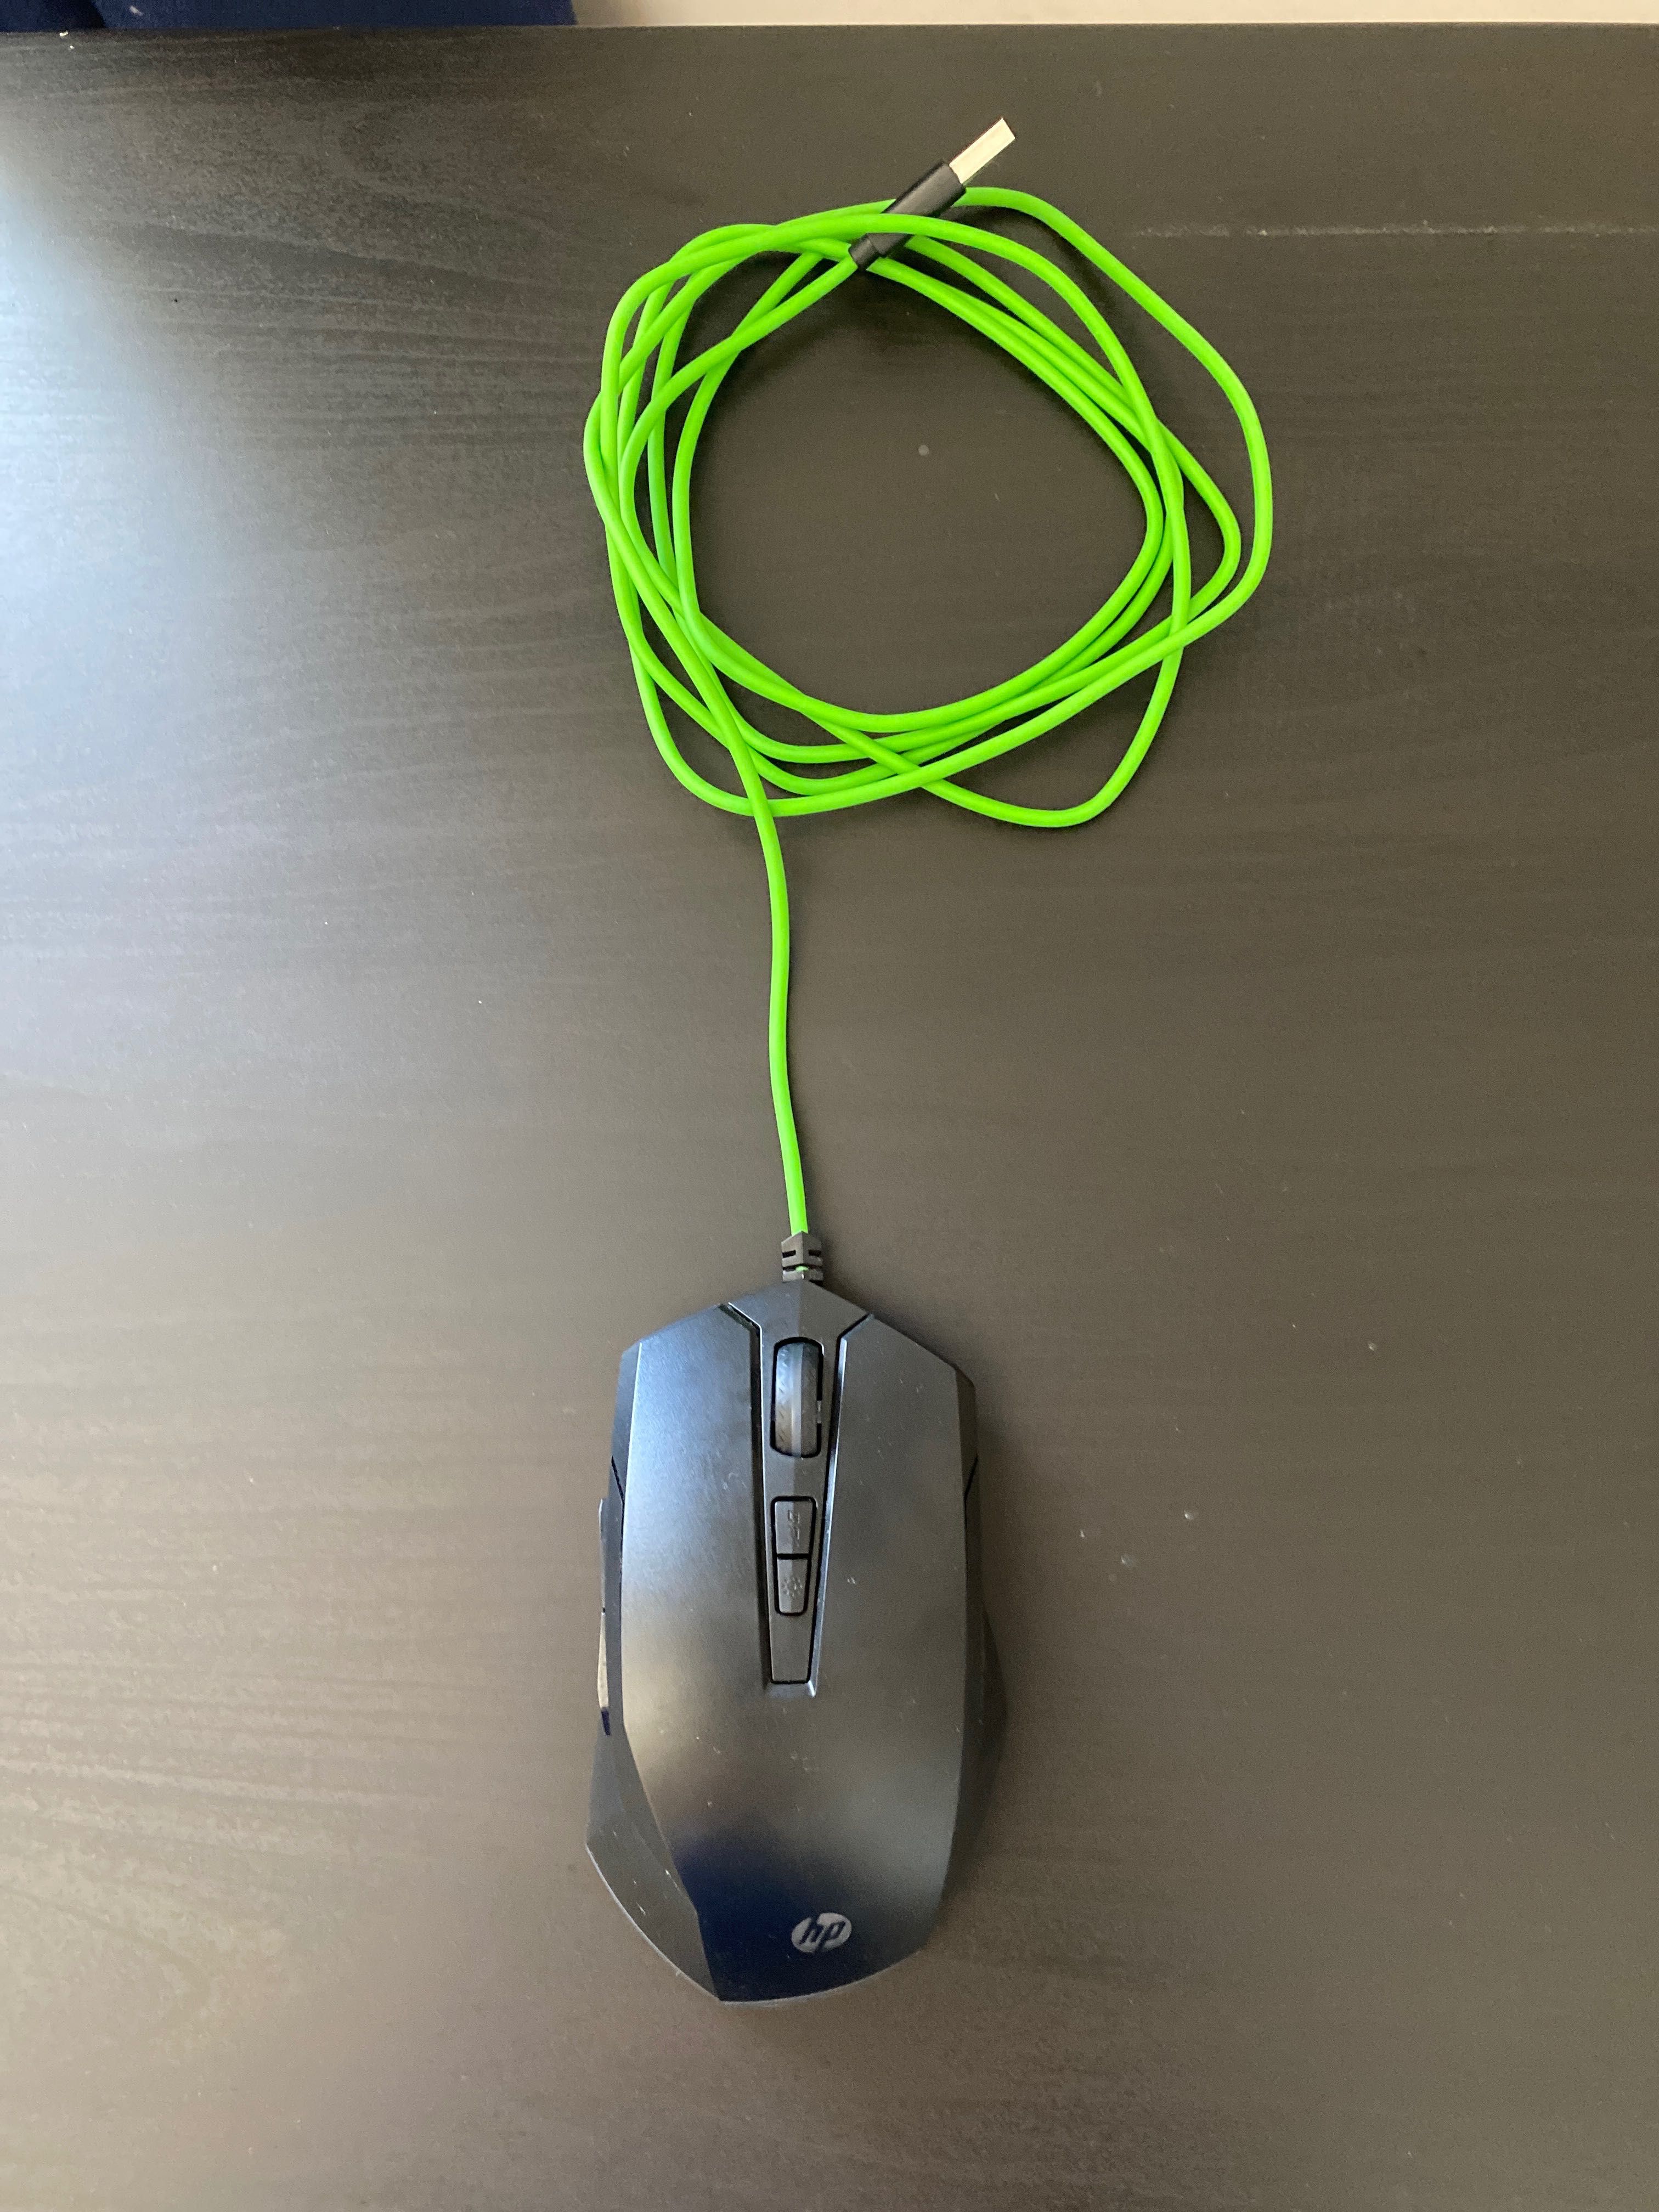 HP pavilion gaming mouse 200